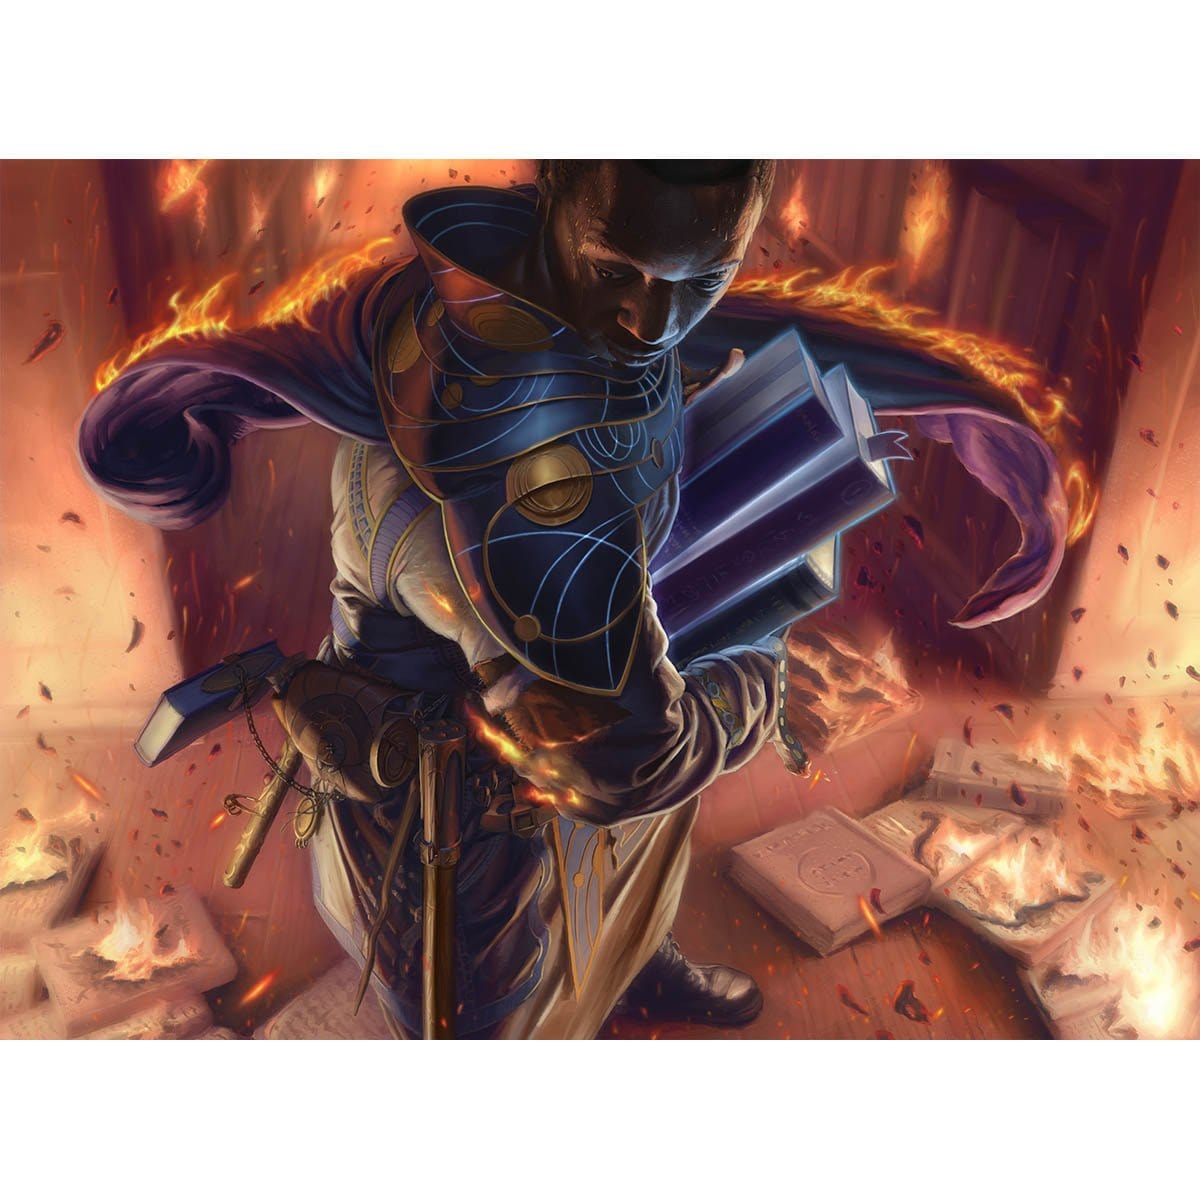 Rescue Print - Print - Original Magic Art - Accessories for Magic the Gathering and other card games